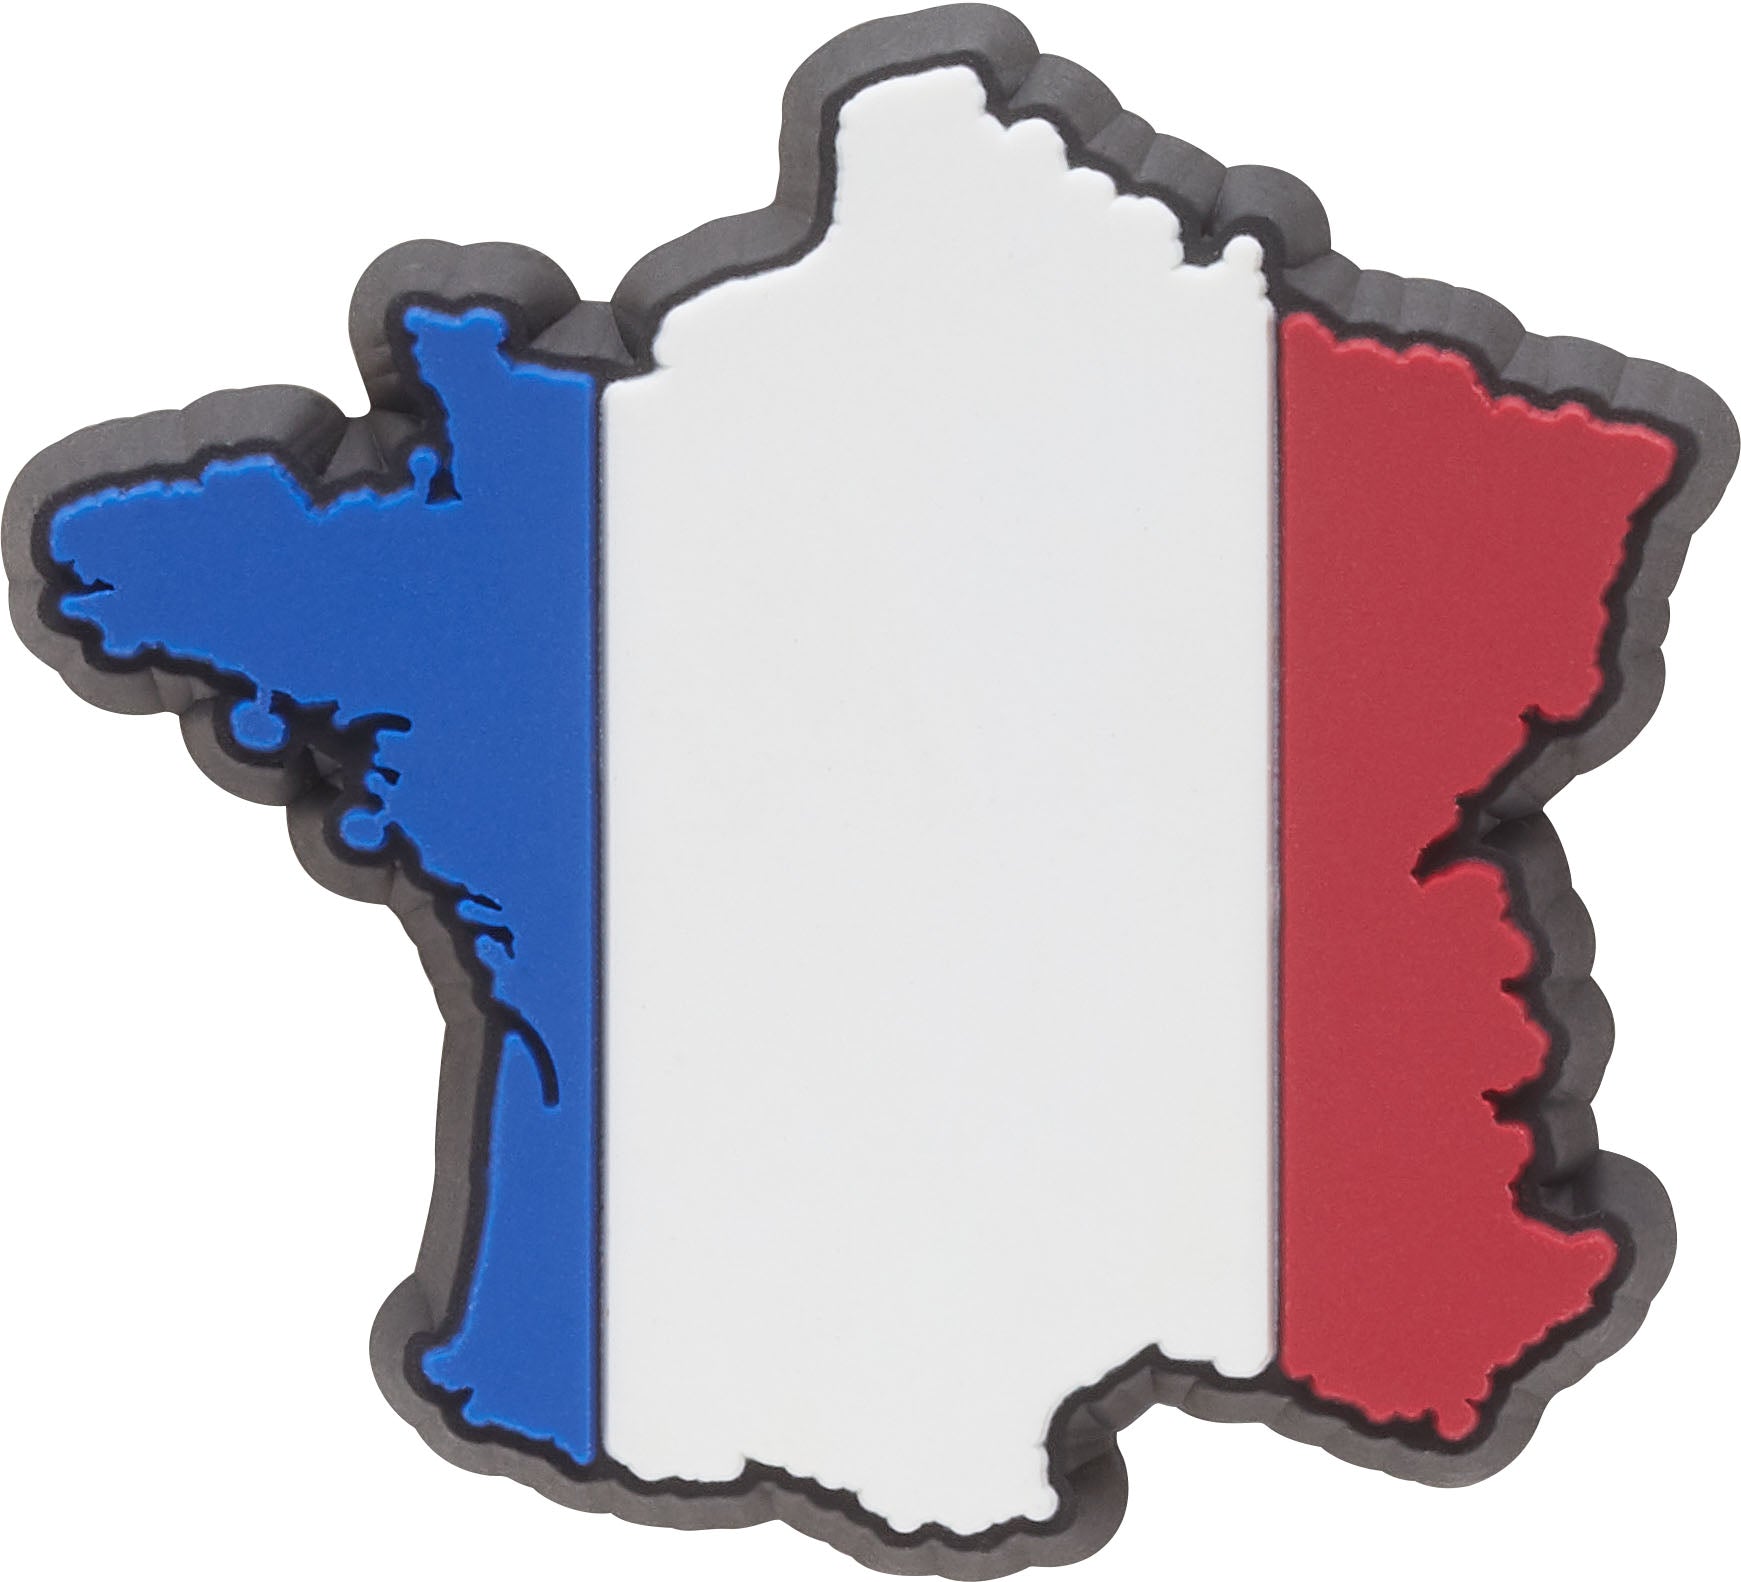 France Country Flag